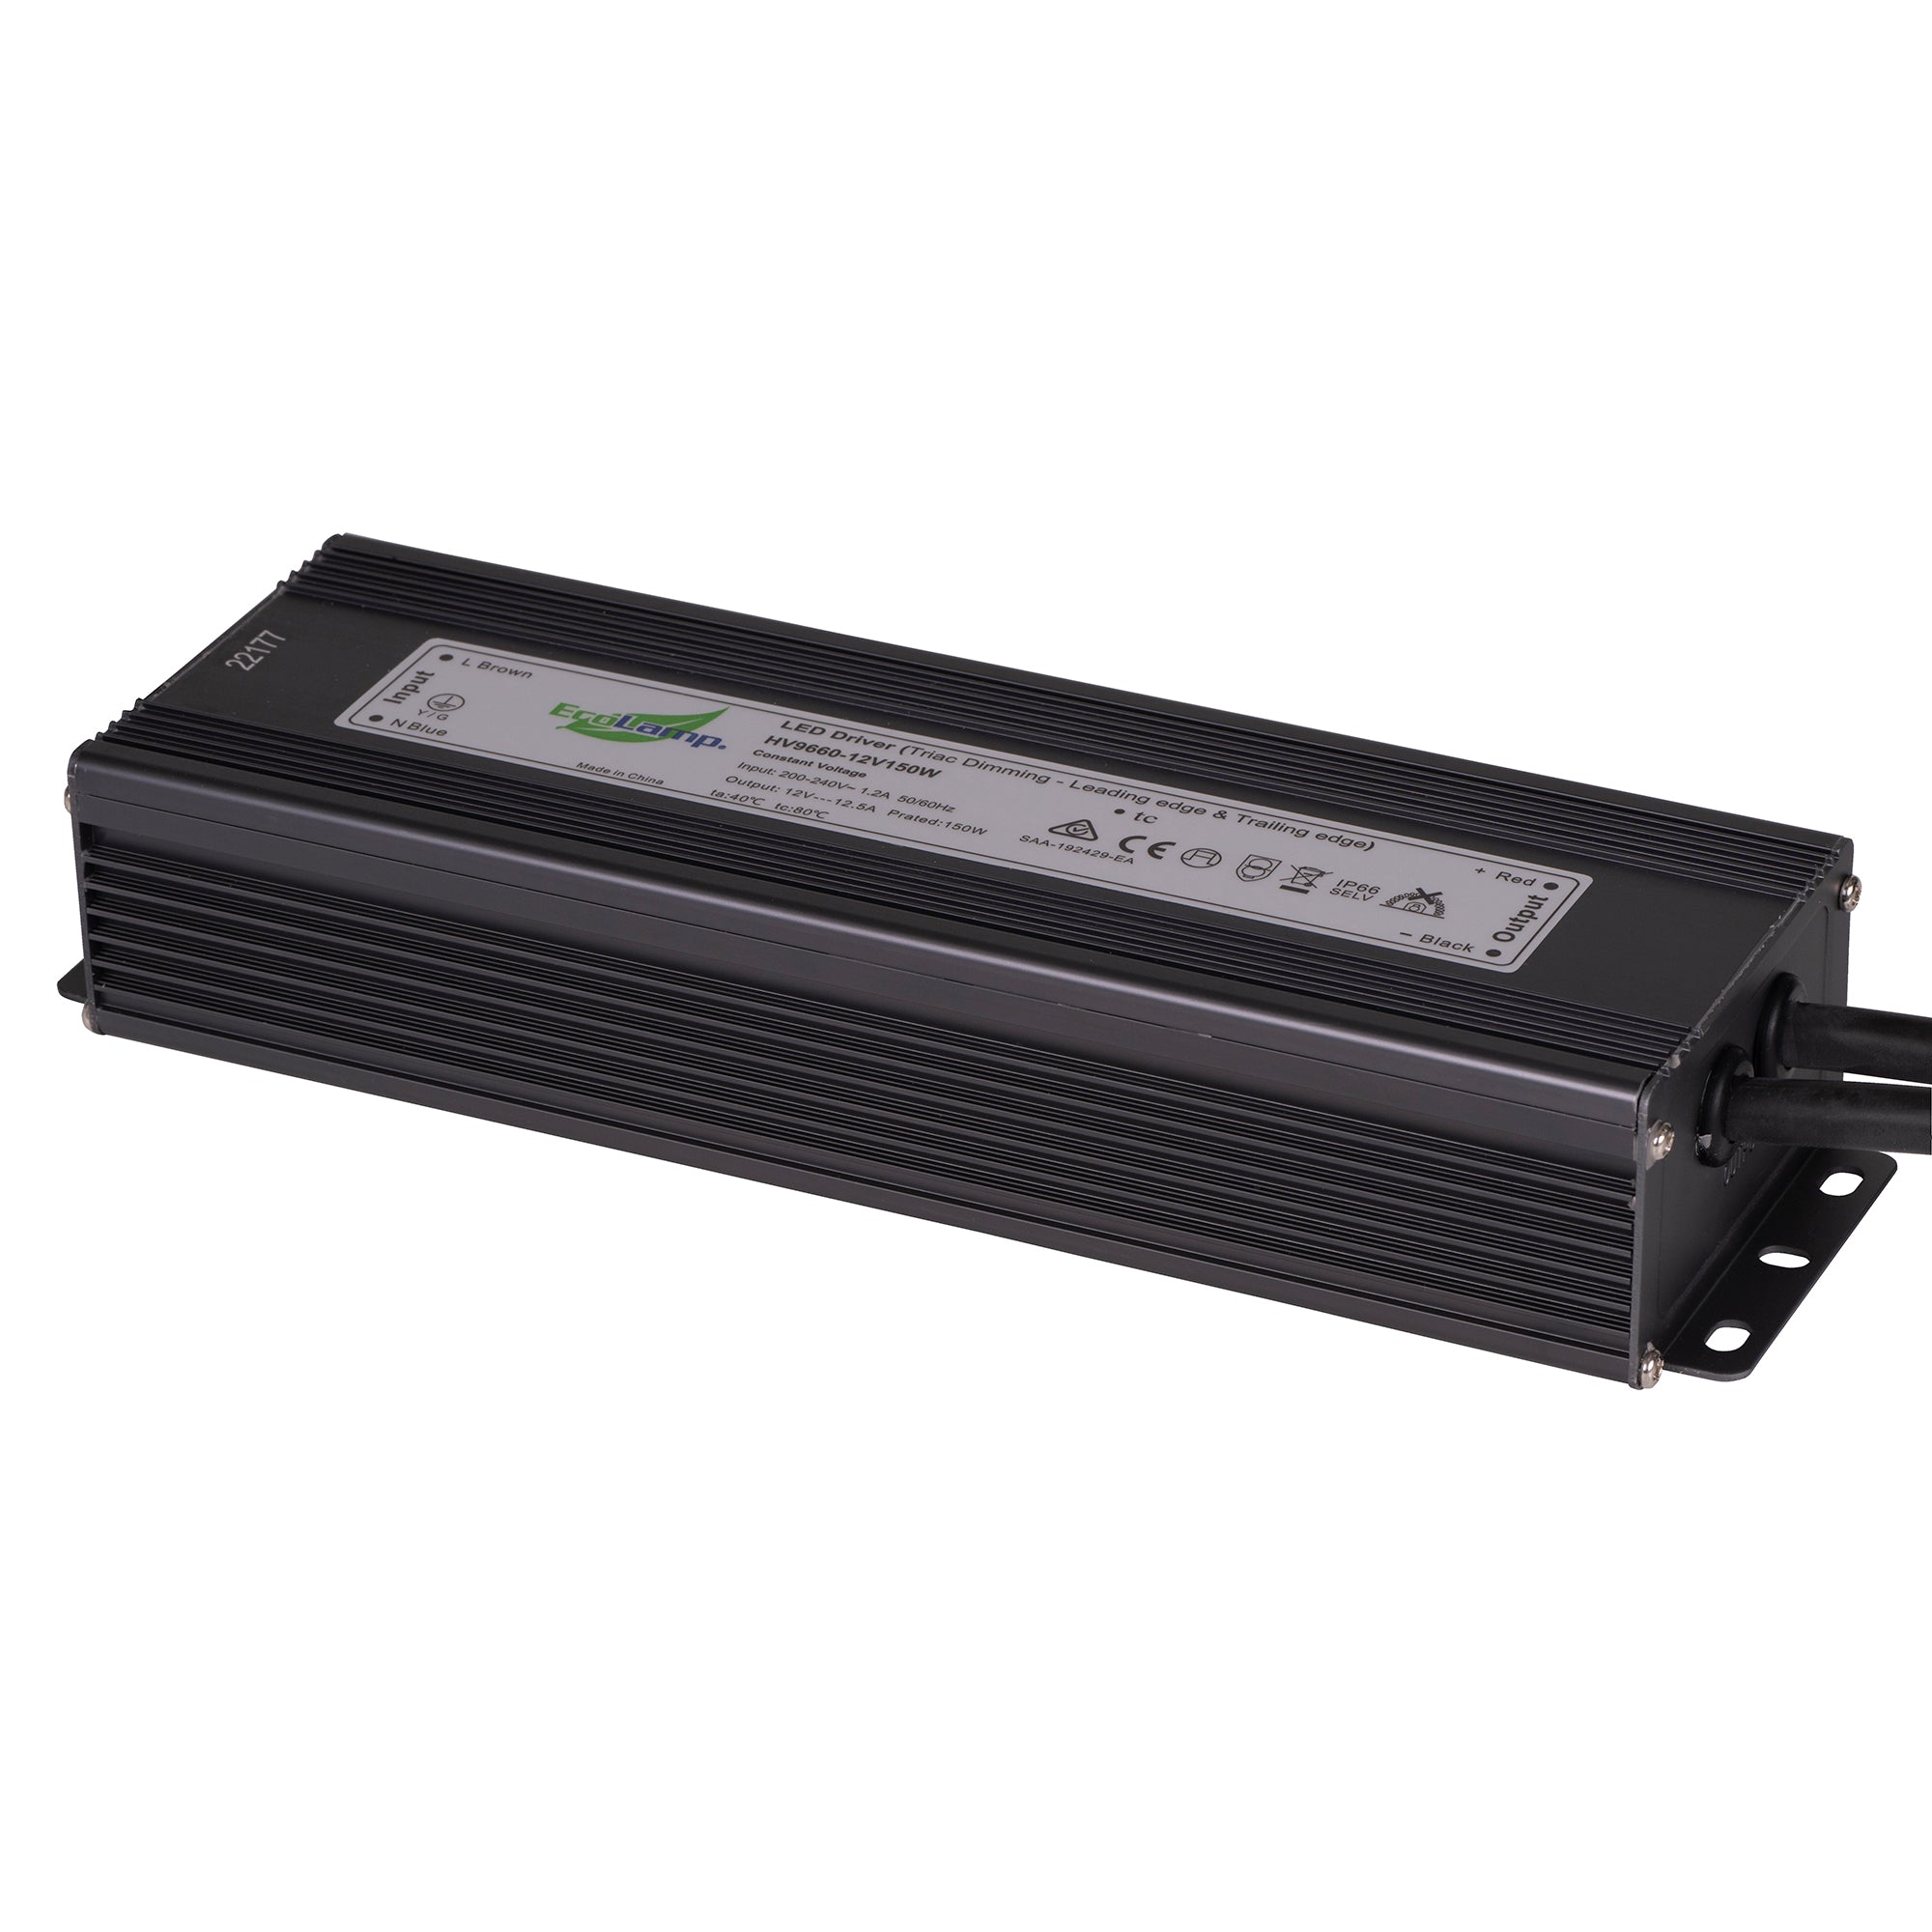 HV9660-150W - 150W Weatherproof Dimmable LED Driver